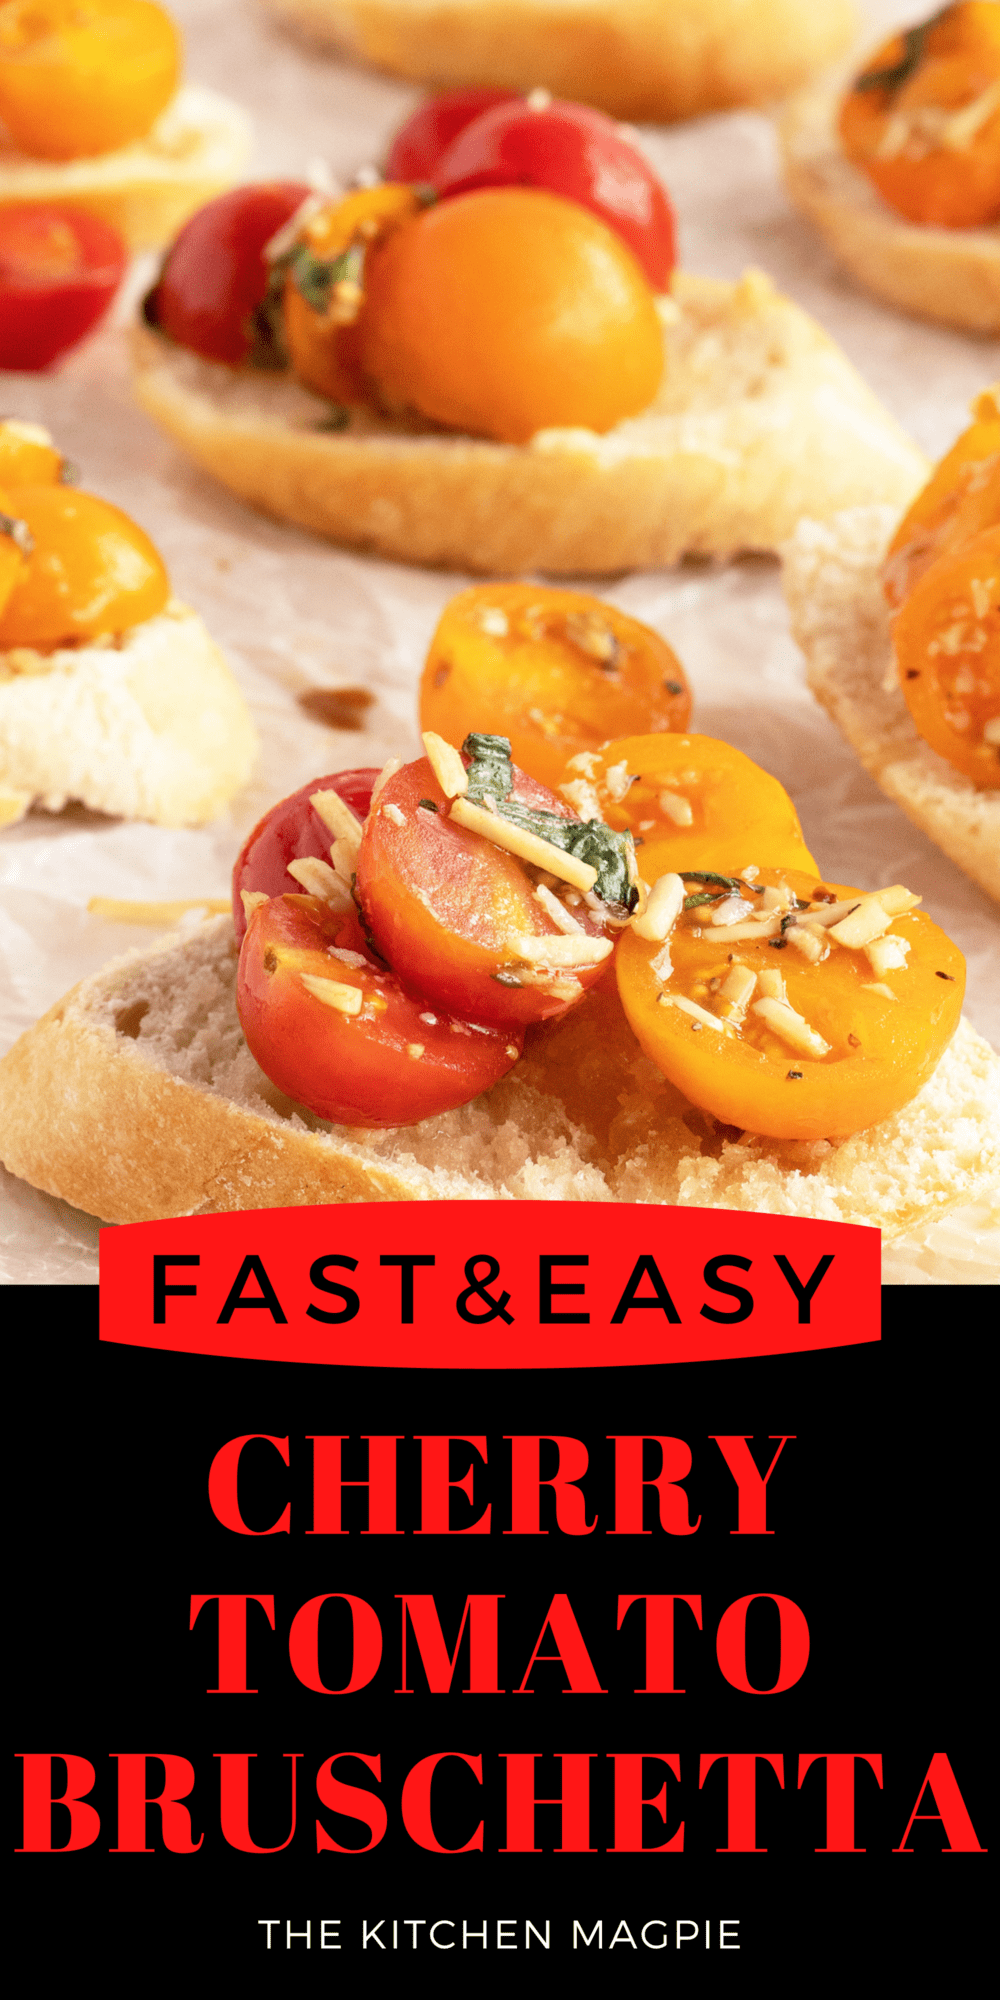 Well, if you've got some bread, some tomatoes, and a little bit of effort, you can make a crunchy, tangy, and delicious bruschetta all on your own!